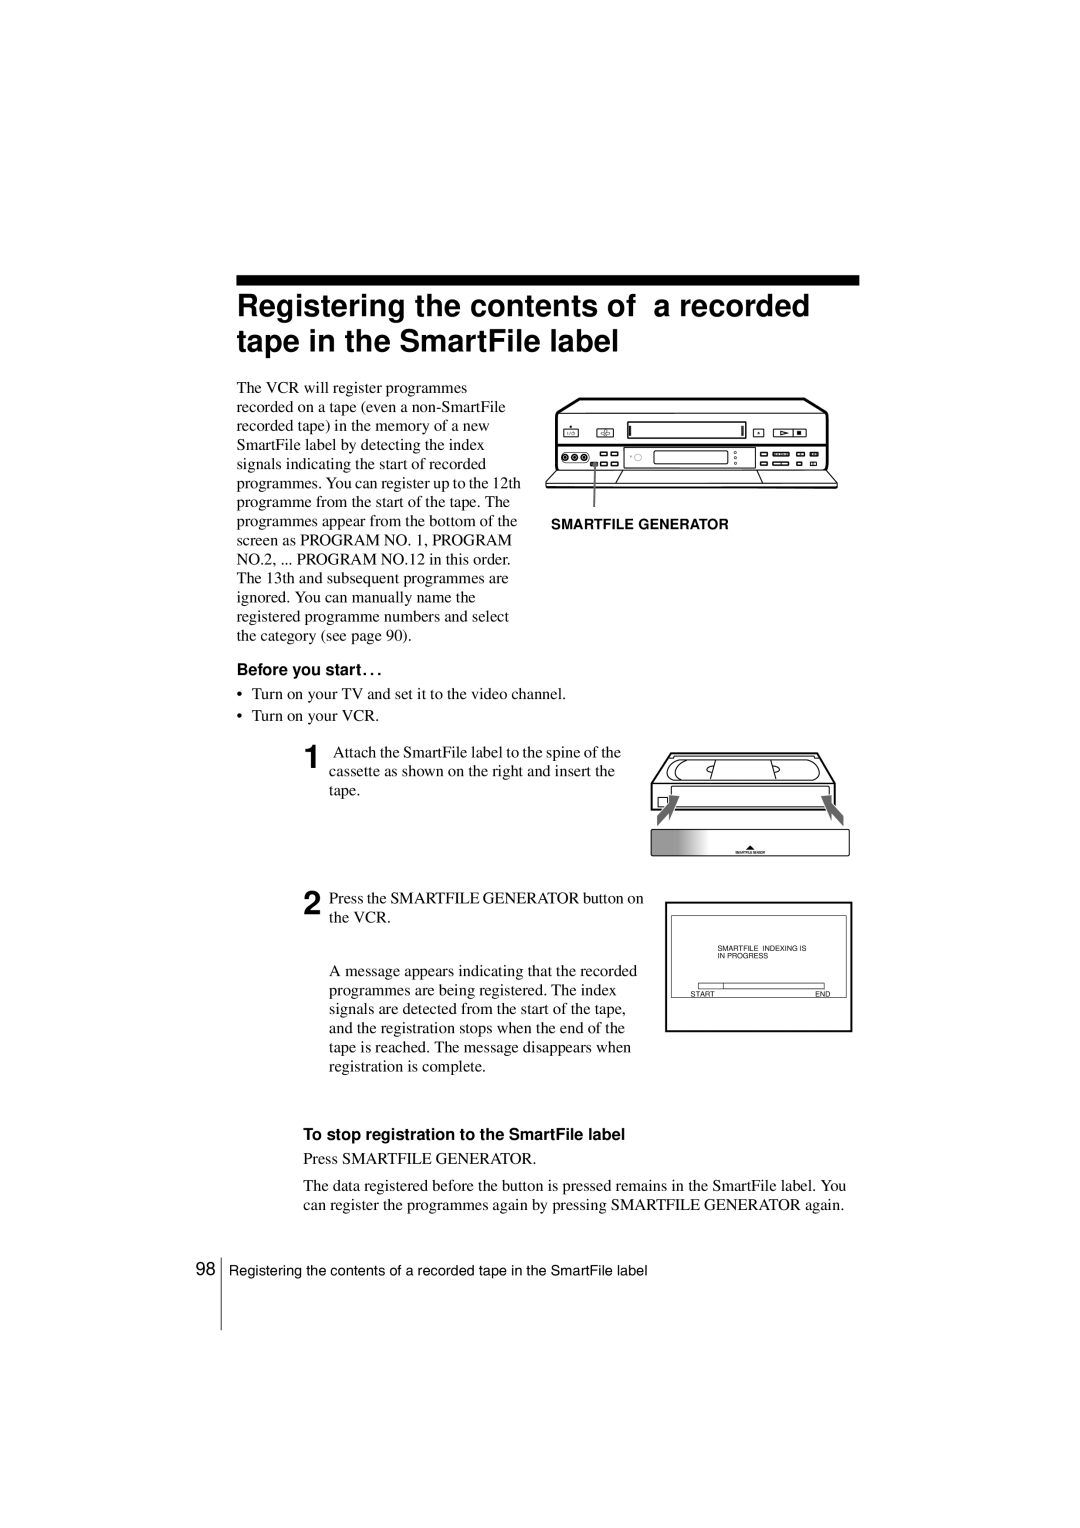 Sony SLV-SF990G manual Registering the contents of a recorded tape in the SmartFile label, Before you start… 